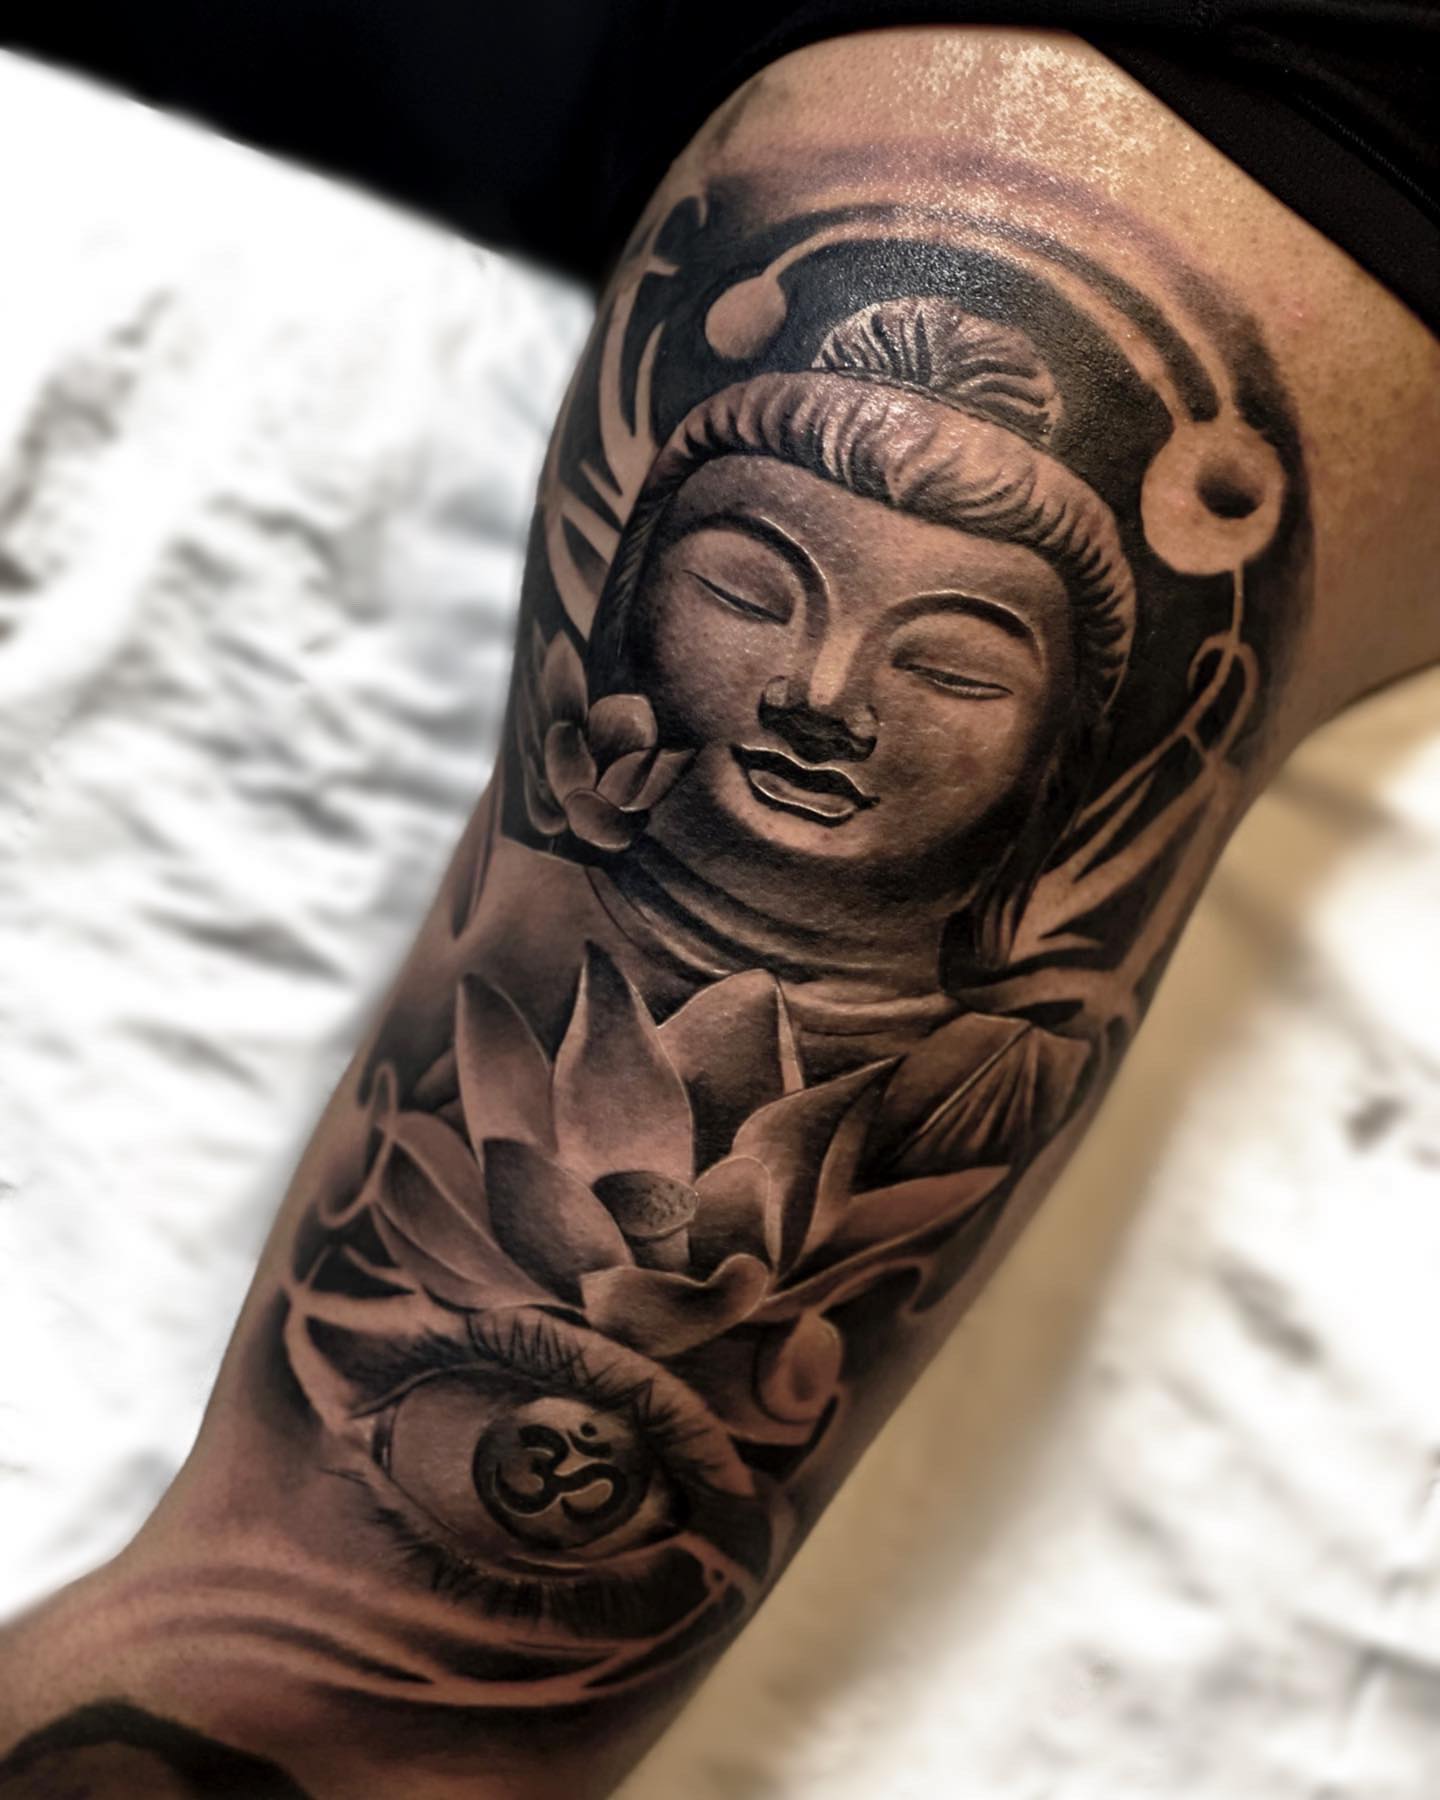 30+ Best Half Sleeve Tattoos: Ideas for Men and Women in 2023